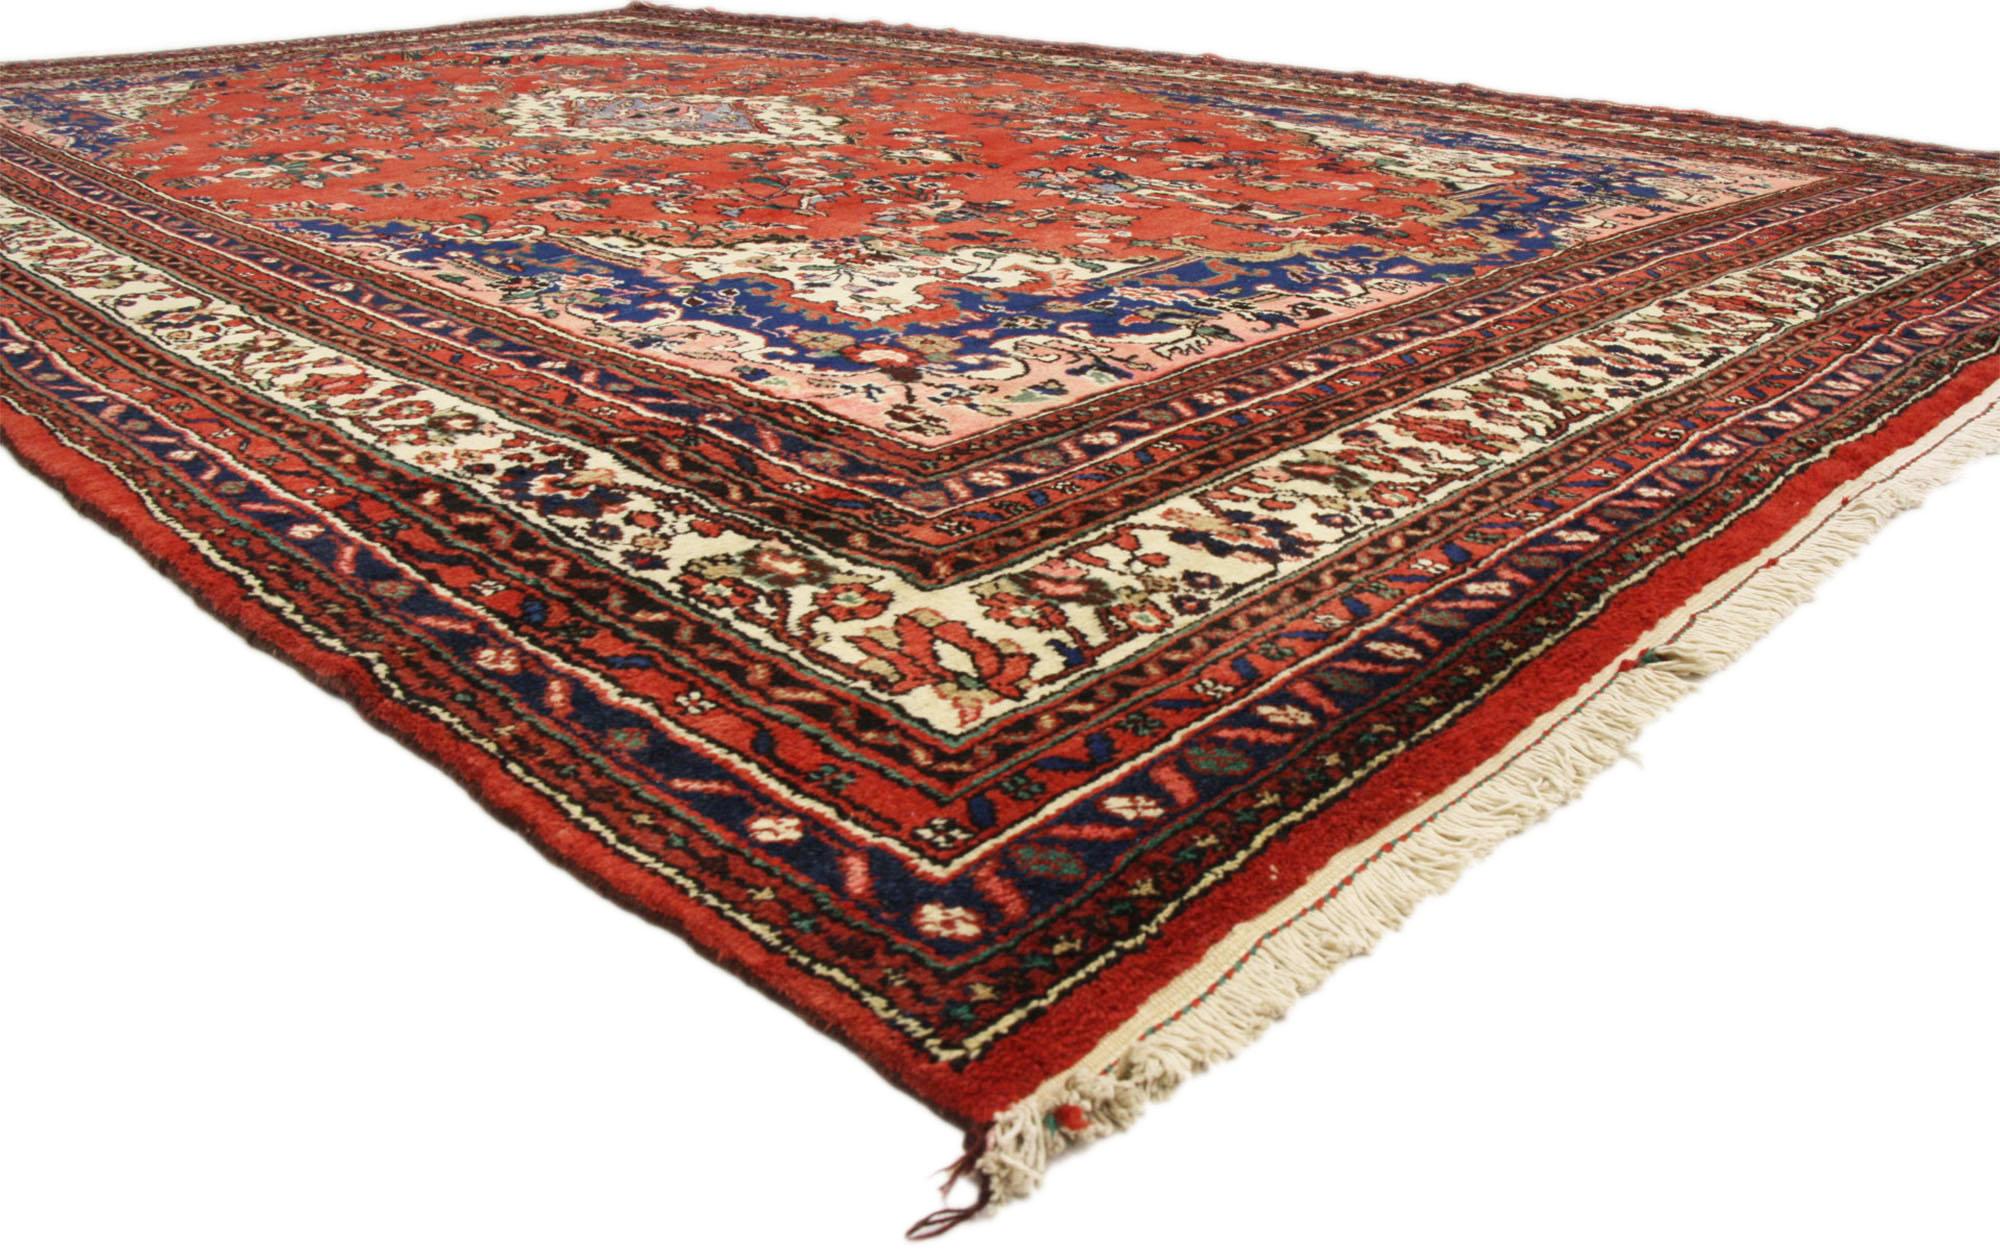 74944 Vintage Persian Hamadan Rug, 10'06 x 17'02.
Emulating regal charm with traditional sensibility, this hand knotted wool vintage Persian Hamadan rug is a captivating vision of woven beauty. The intricate floral design and sophisticated color